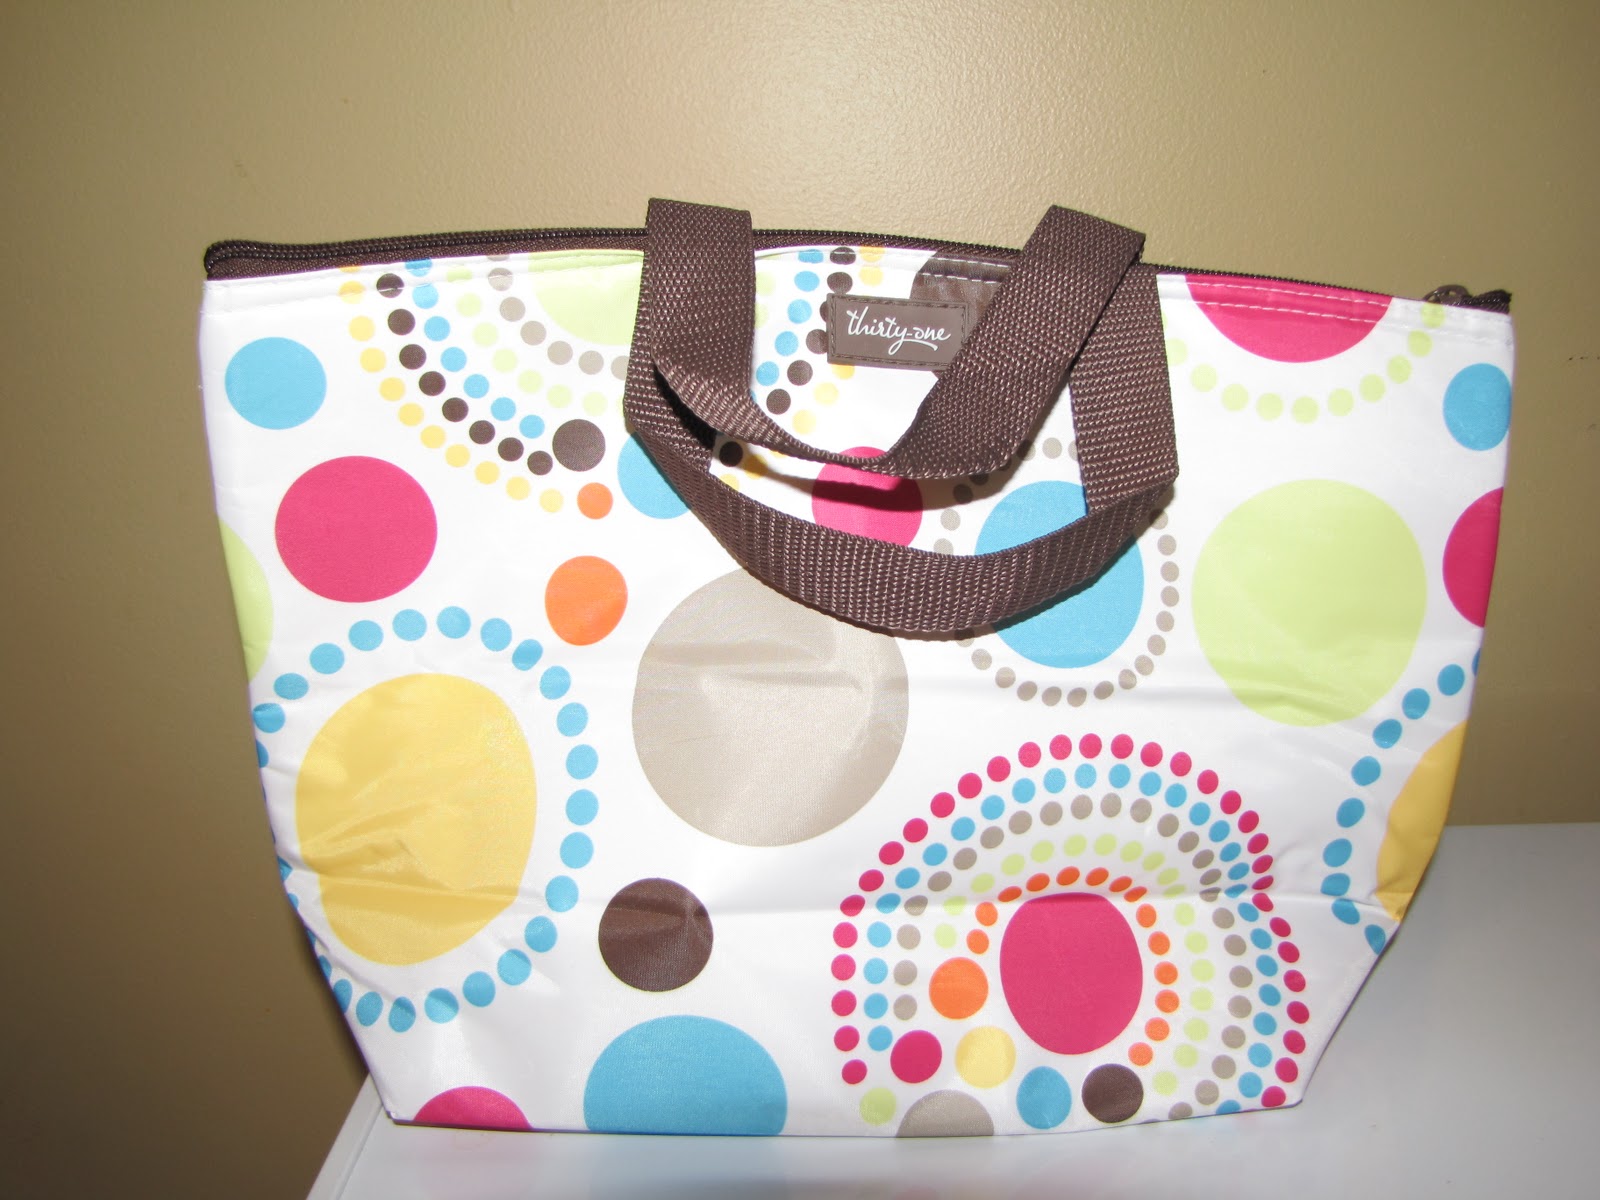 Purposeful Homemaking: Take Your Lunch to Work PLUS a Thirty-One GIVEAWAY!